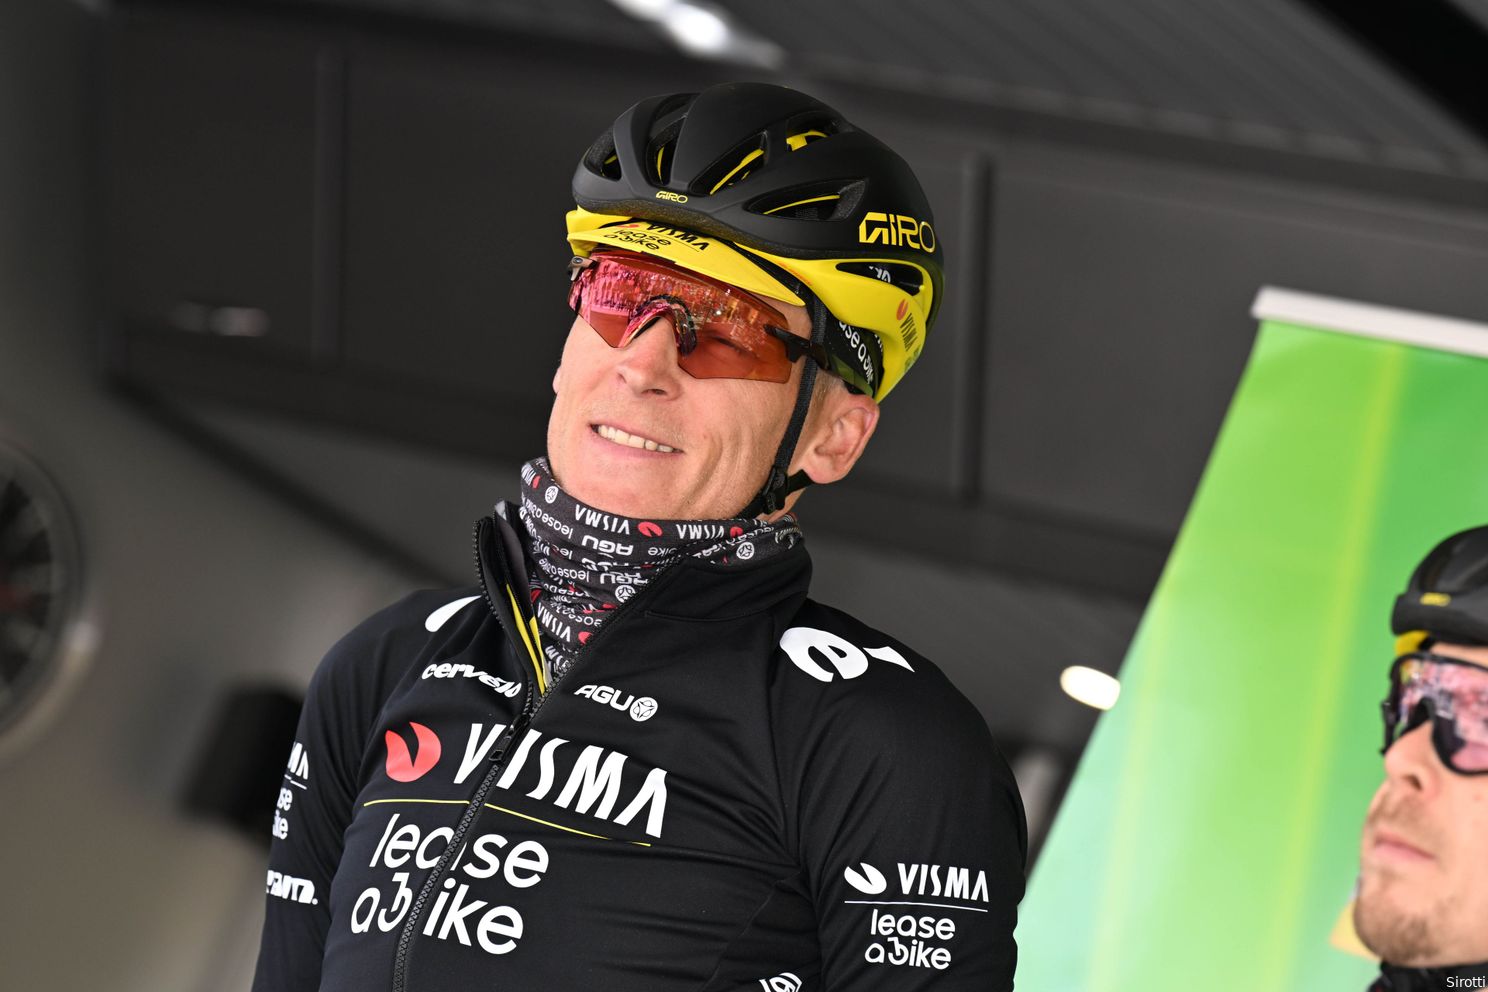 Gesink's words feel particularly bitter after Giro crash, Uijtdebroeks says mentor's dropout is "really shitty"